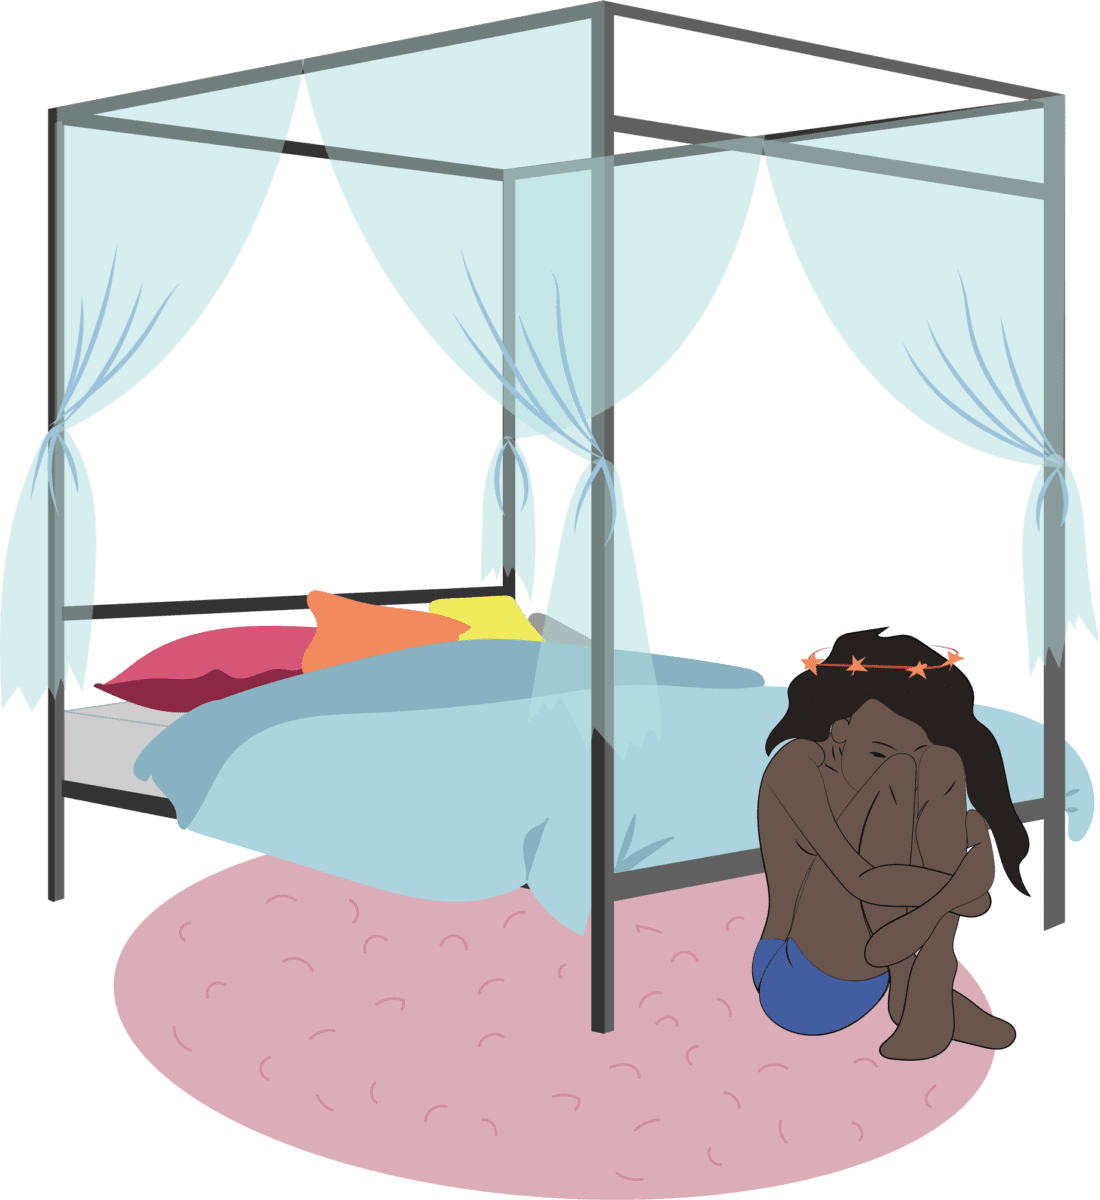 An illustration of a distressed woman with dark skin sitting next to a four poster bed with blue hangings. Colourful pillows lie on the bed and a pink rug is underneath it.